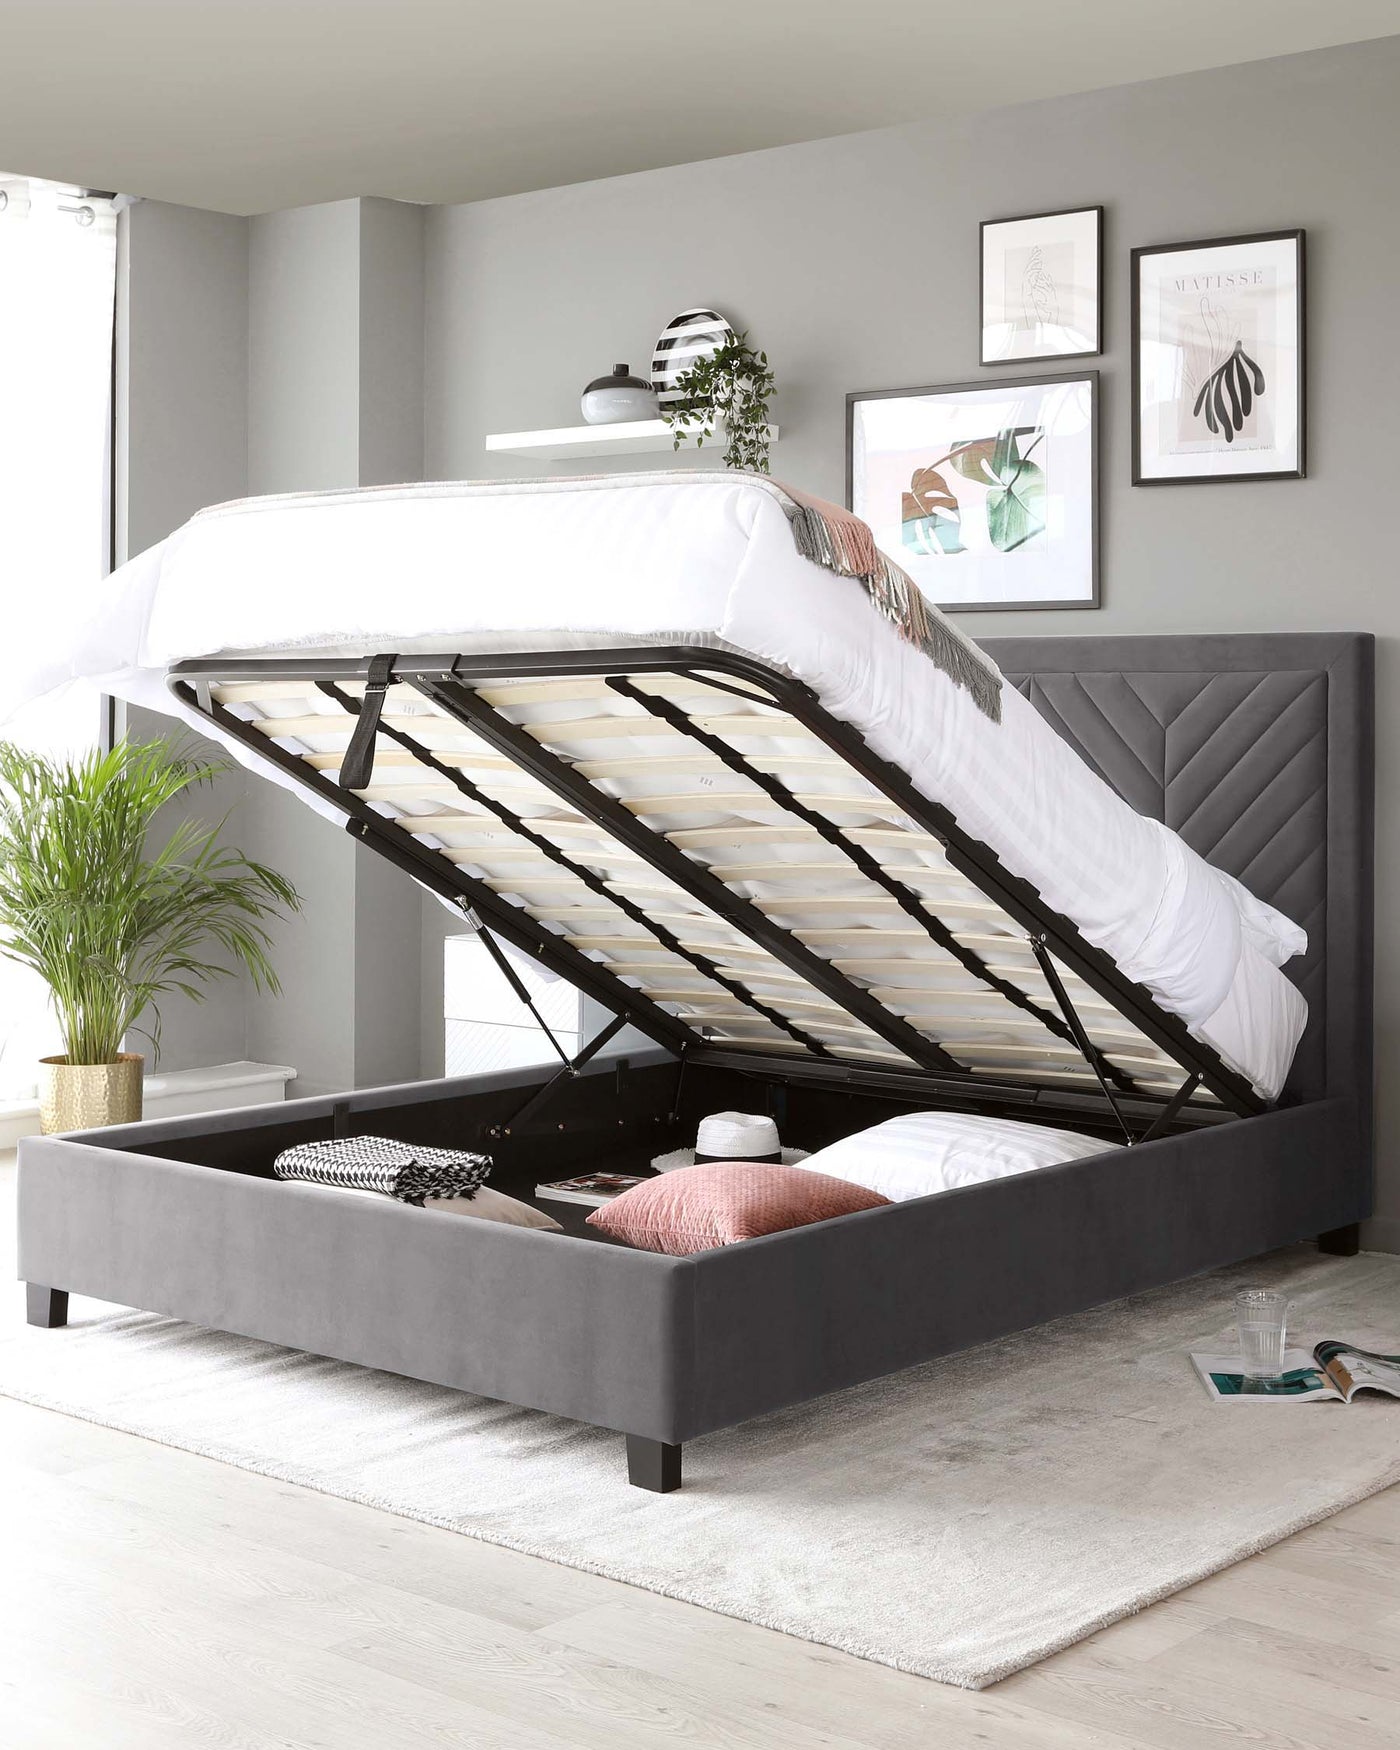 Elegant grey upholstered storage bed with a lifted frame revealing spacious under-bed storage, showcasing a diamond-tufted headboard design, set upon sturdy wooden legs, without bedding set against a neutral backdrop.